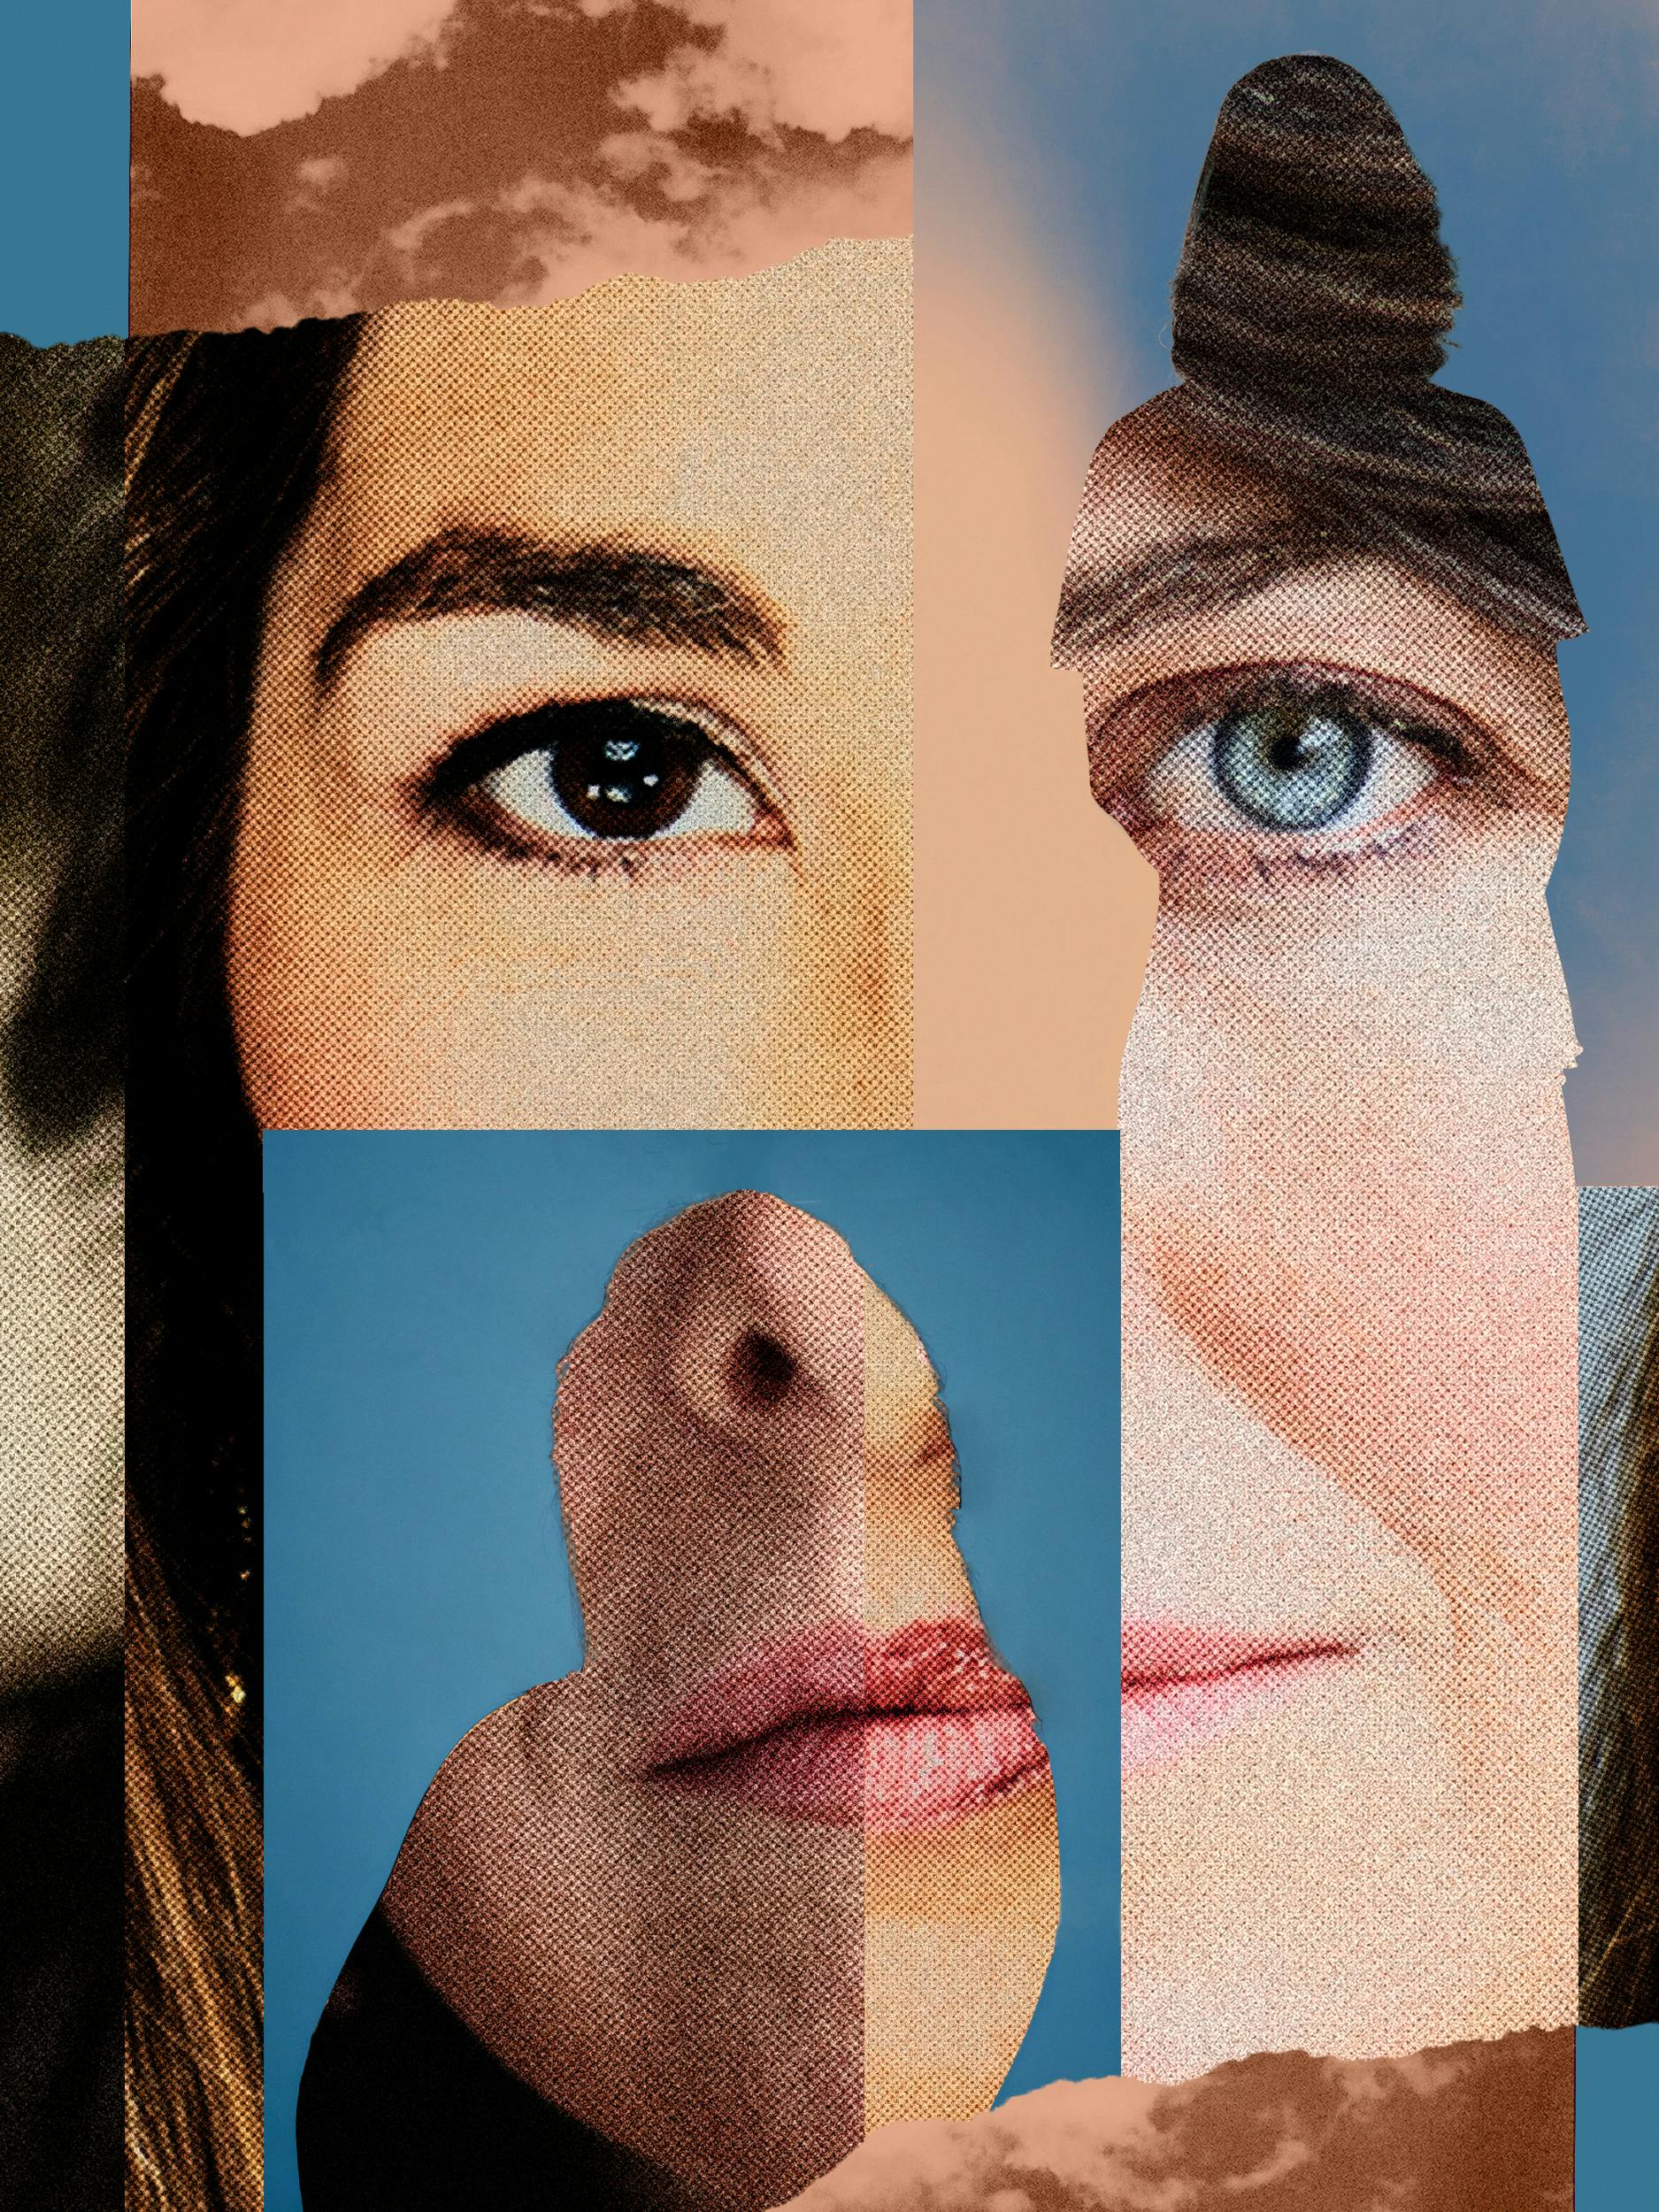 Naomi Klein's Journey Into the Unnerving World of Naomi Wolf